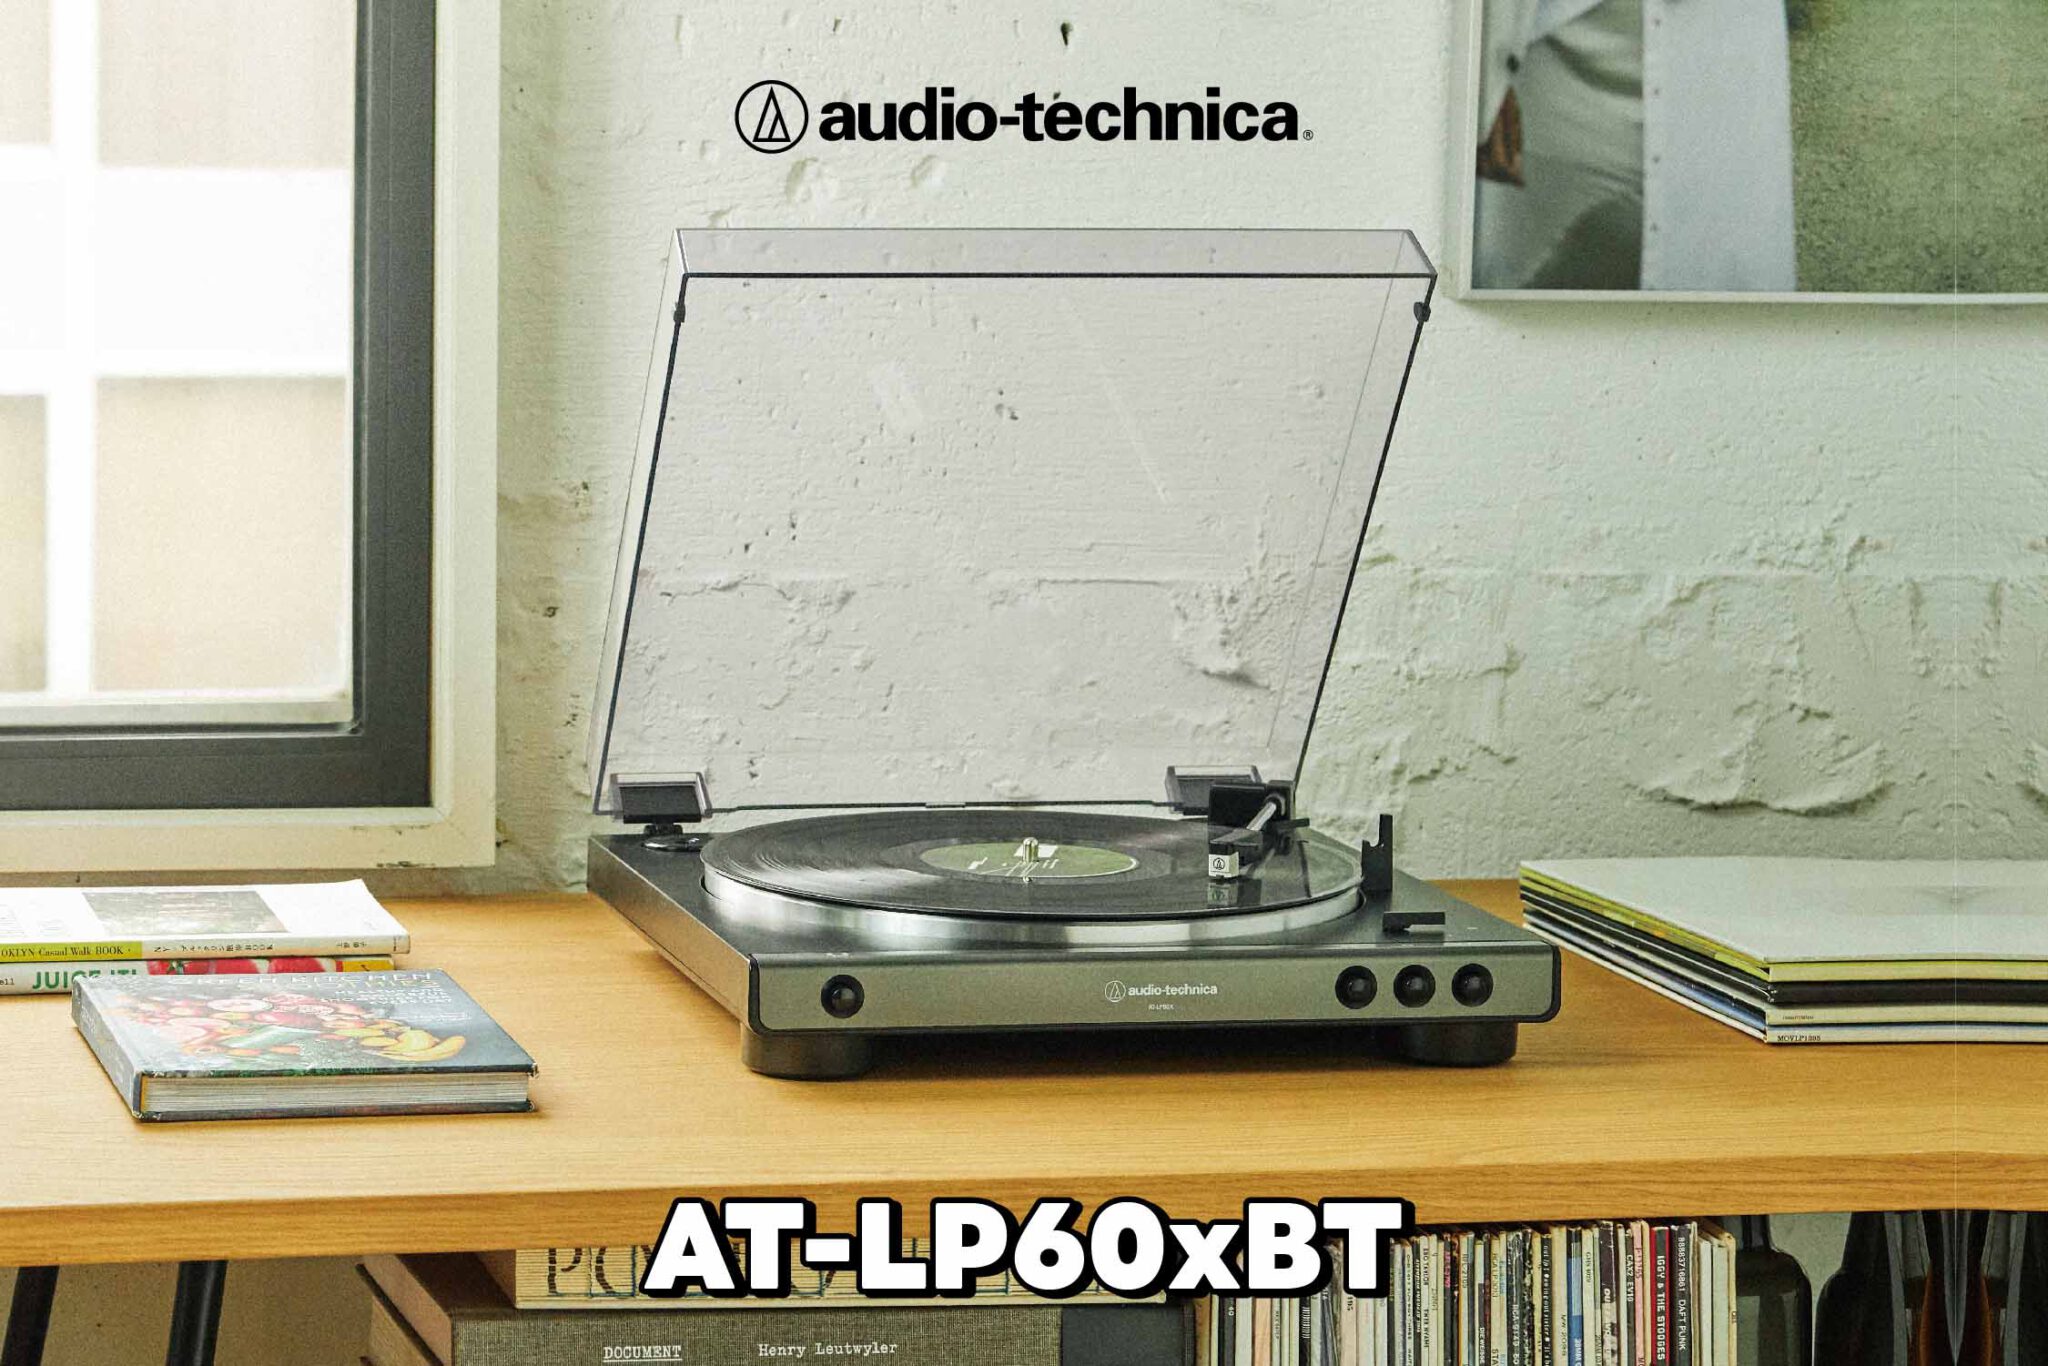 Audio-Technica - Pic AT LP60XBT scaled - ภาพที่ 5